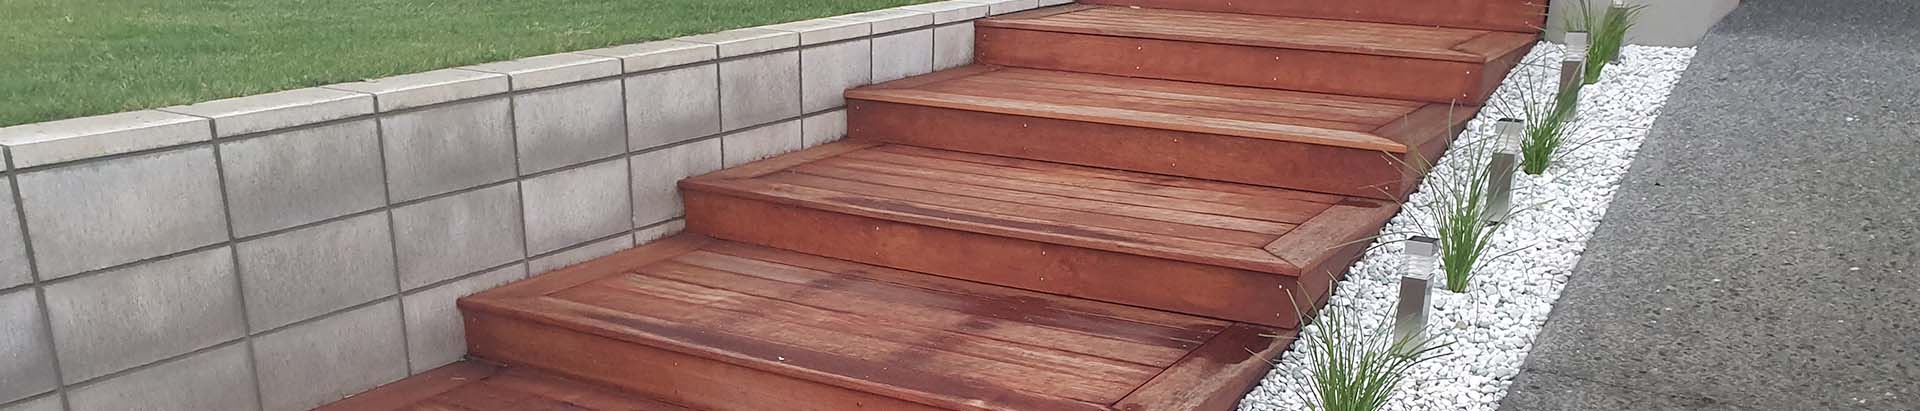 decking steps with gravel edging and lights